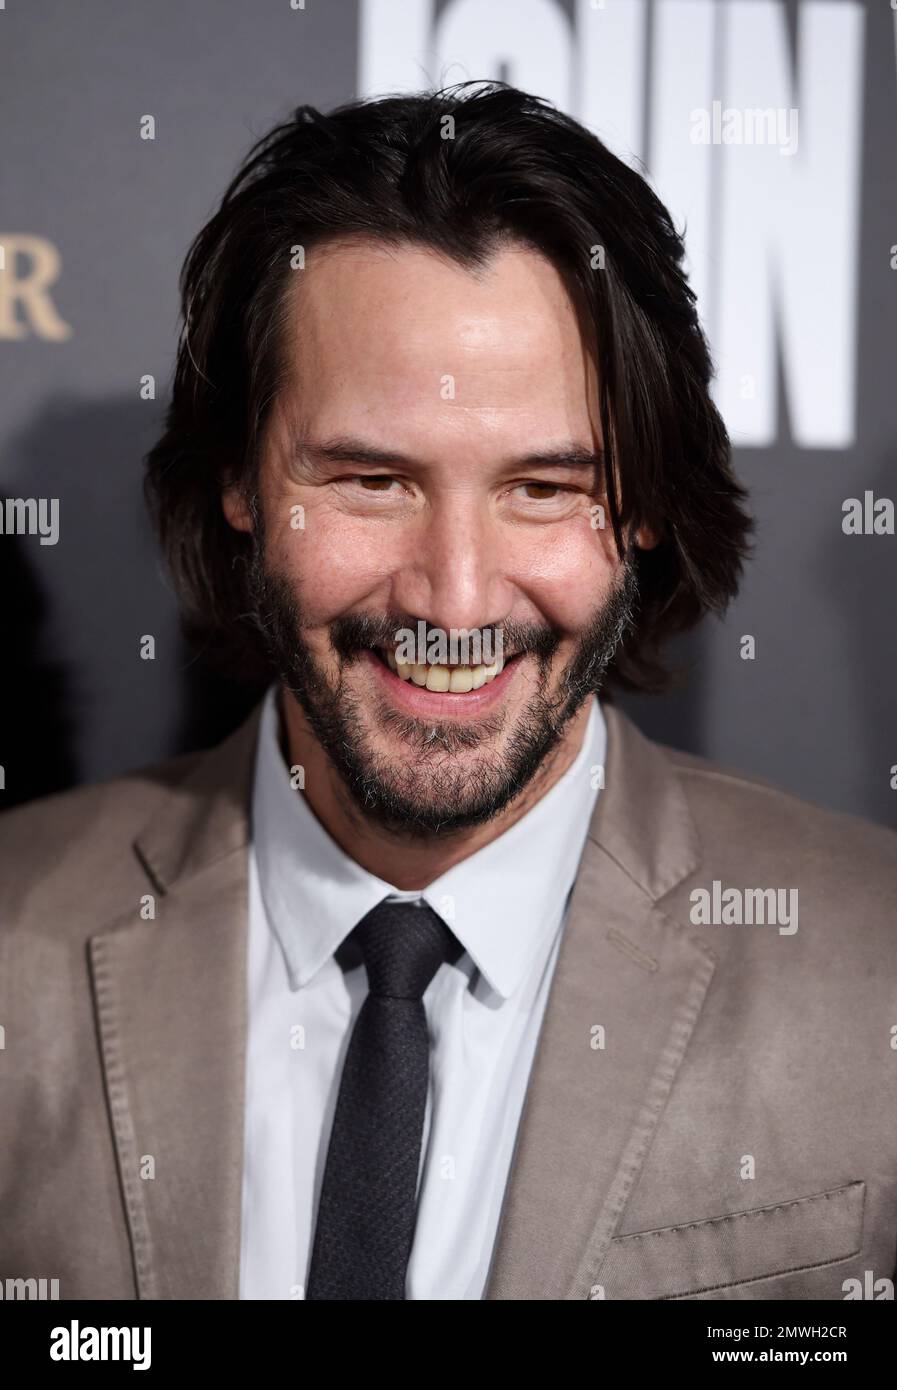 Keanu Reeves, a cast member in John Wick: Chapter 2, poses at the  premiere of the film at ArcLight Cinemas on Monday, Jan. 30, 2017, in Los  Angeles. (Photo by Chris Pizzello/Invision/AP